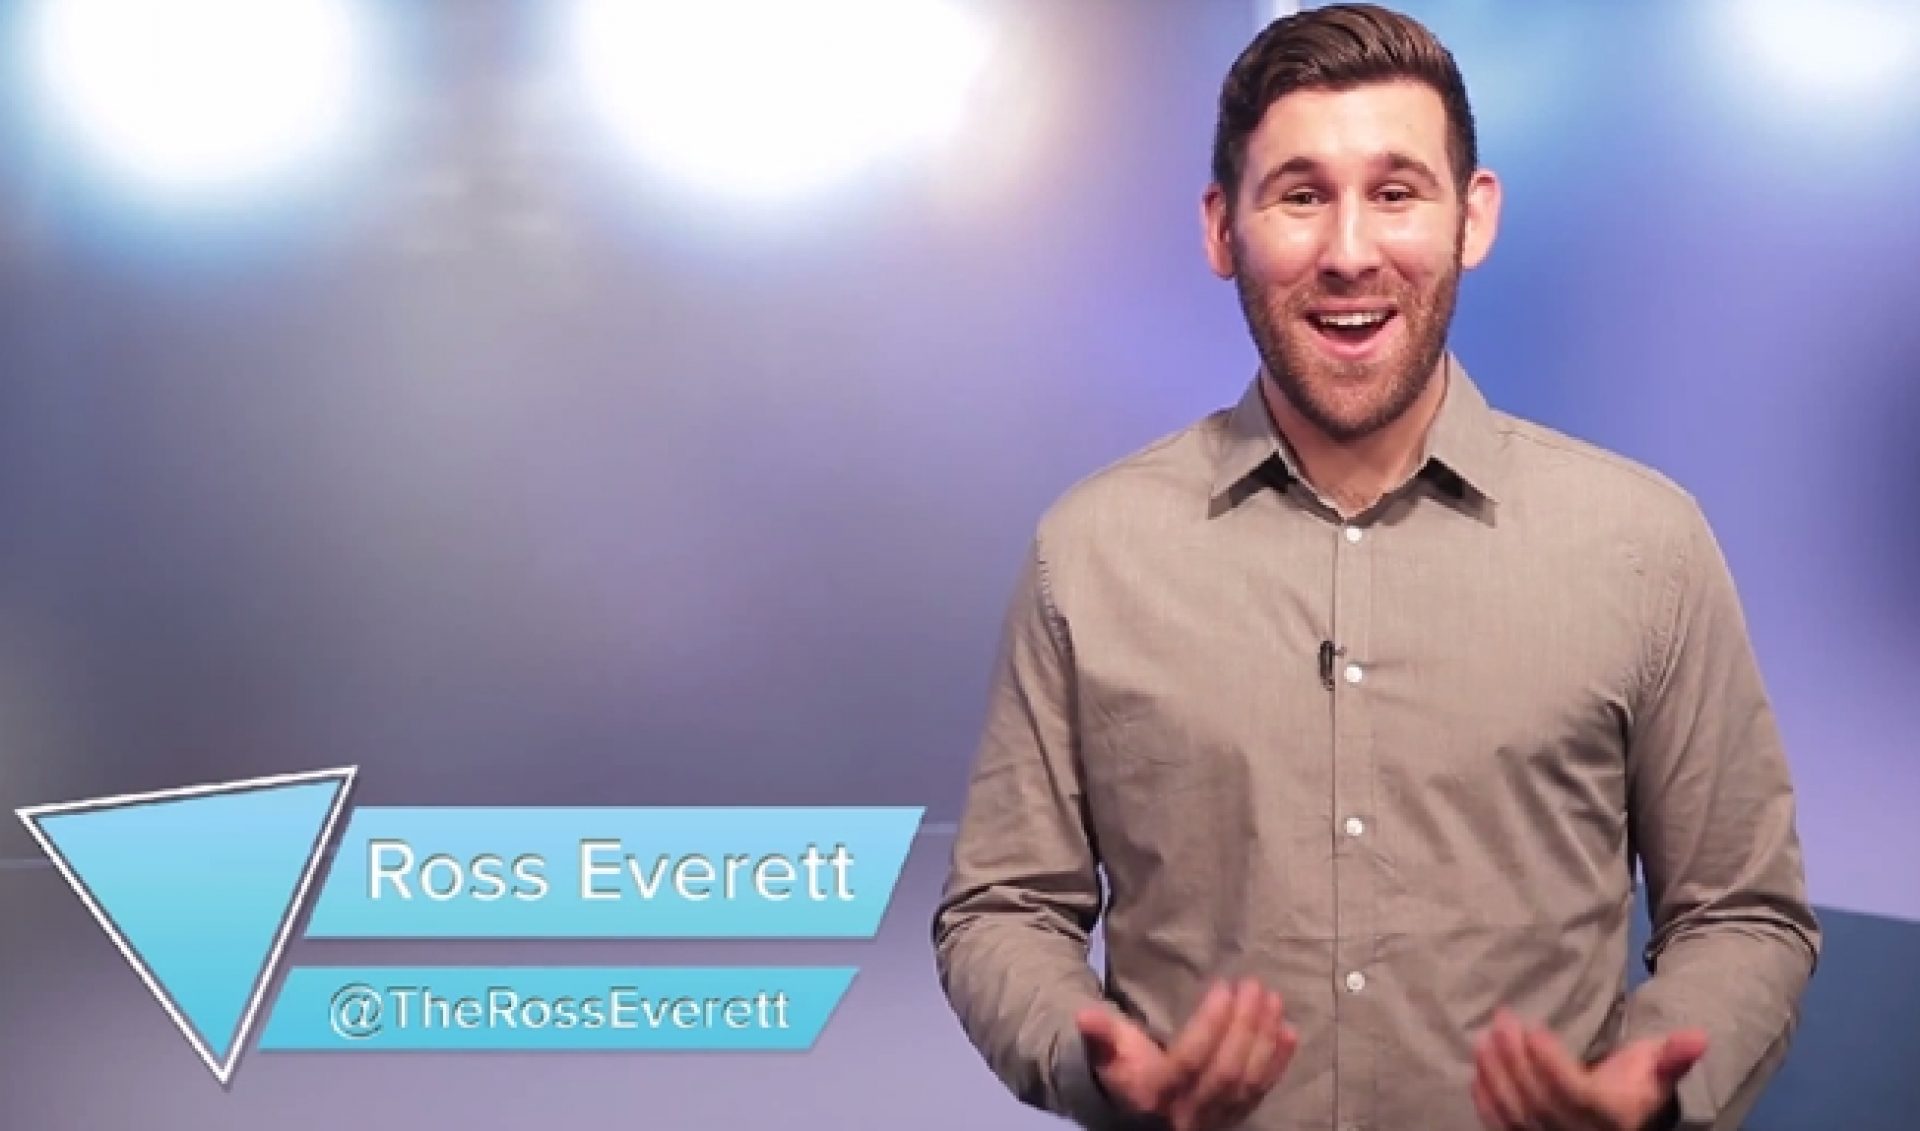 Ross Everett’s ‘New Show’ Launches Its First Episode